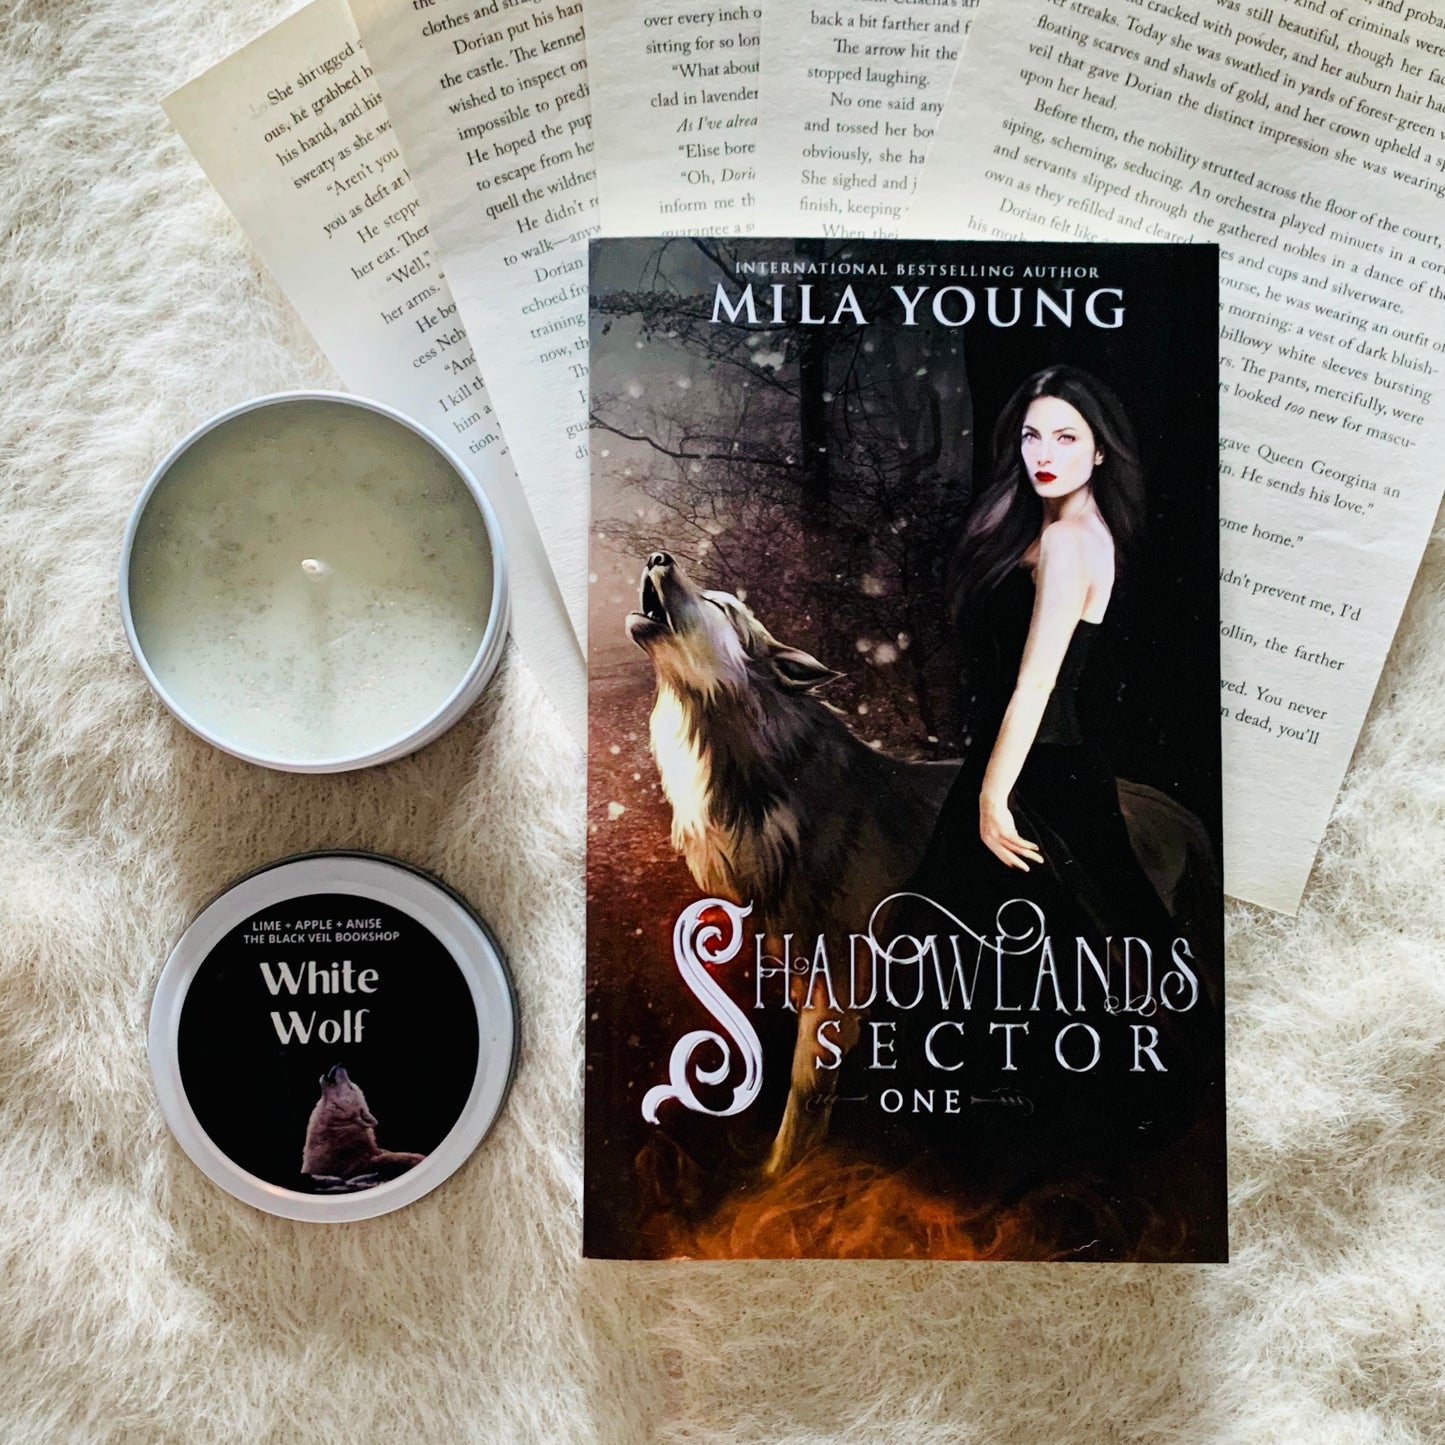 Shadowlands Series by Mila Young